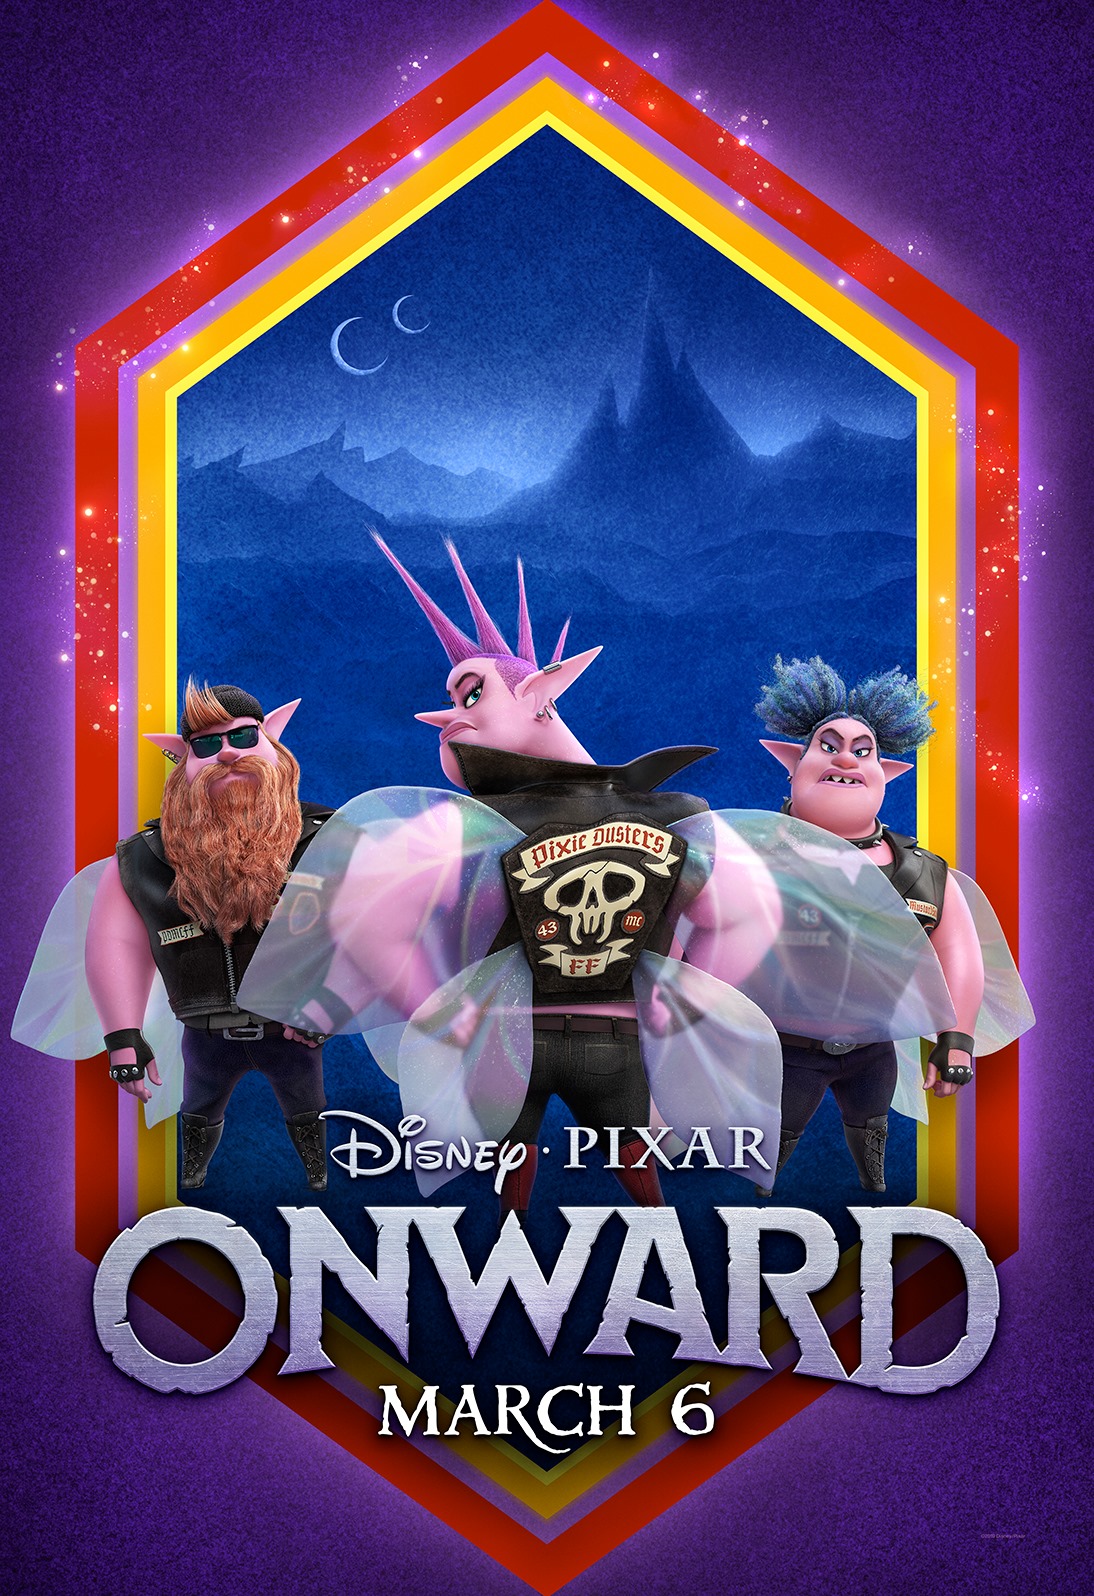 Is it Fair to Compare "Onward" to "Frozen" and Call it "Brozen"? #PixarOnward